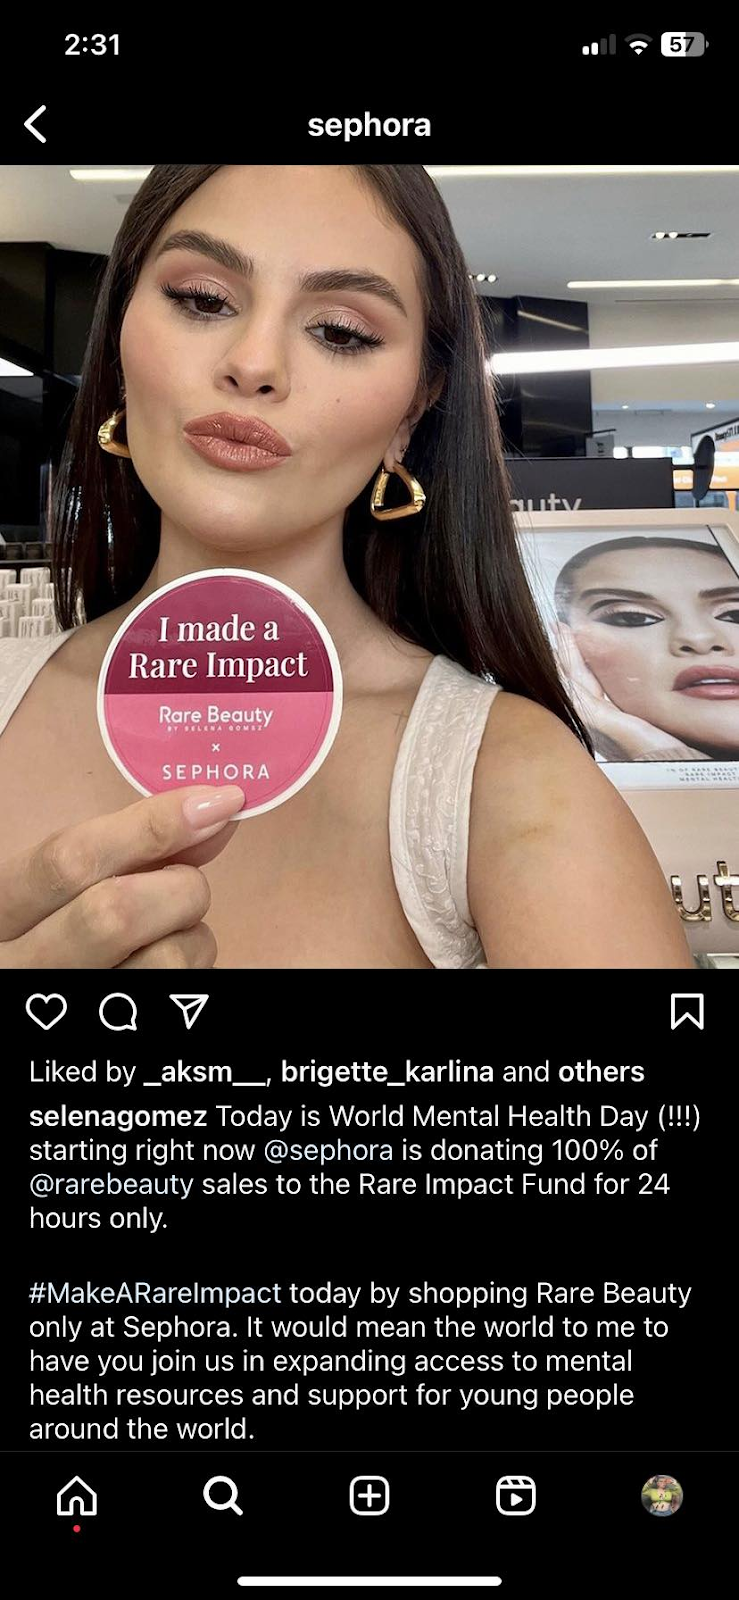 Sephora and Instagram go after younger shoppers - Glossy